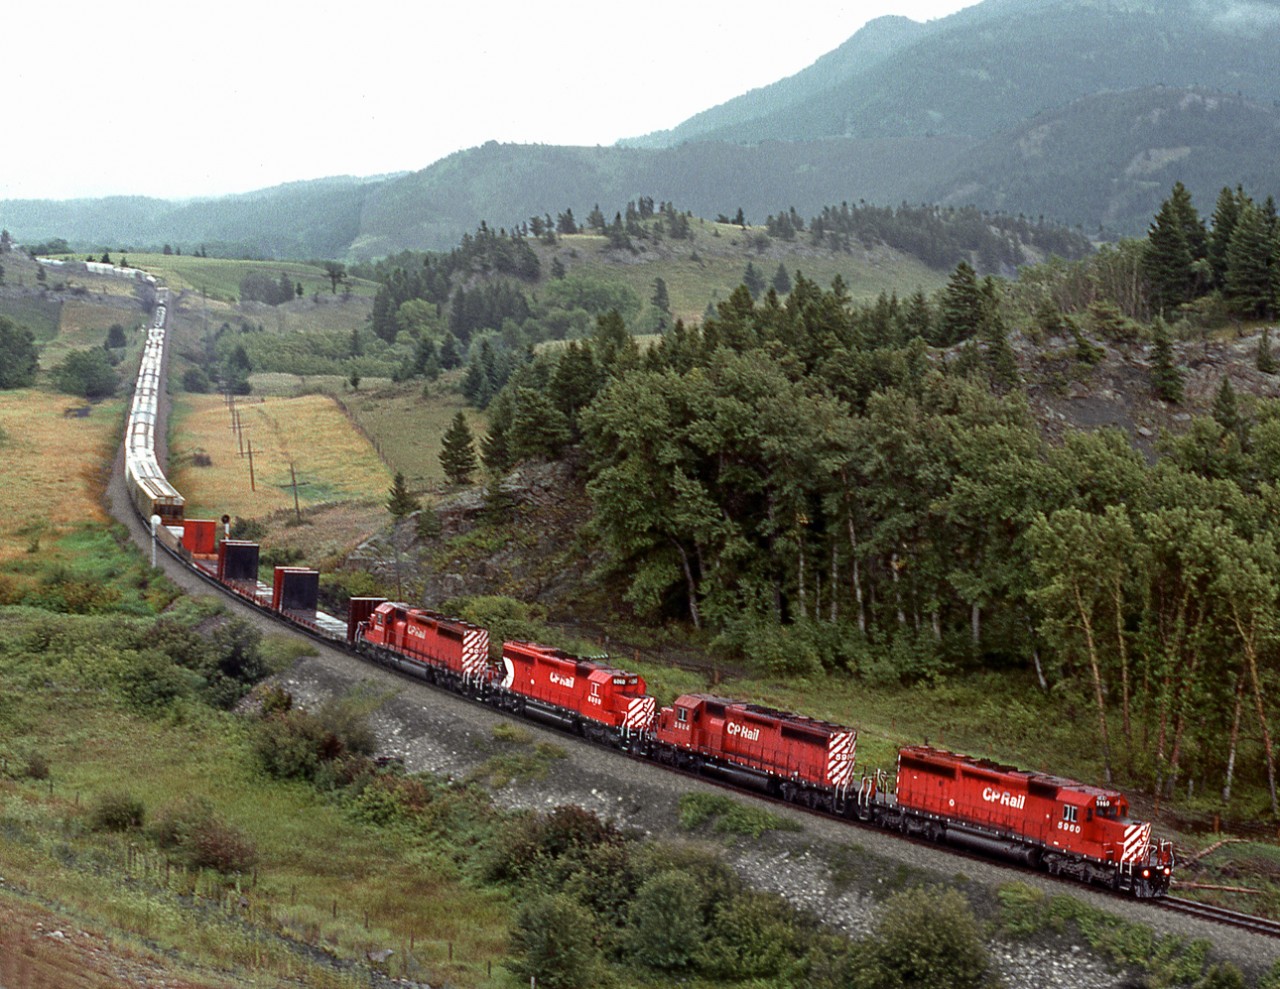 Westbound train 979 bound for the UP interchange at Kingsgate B.C. starts the climb to the summit of Crowsnest Pass.